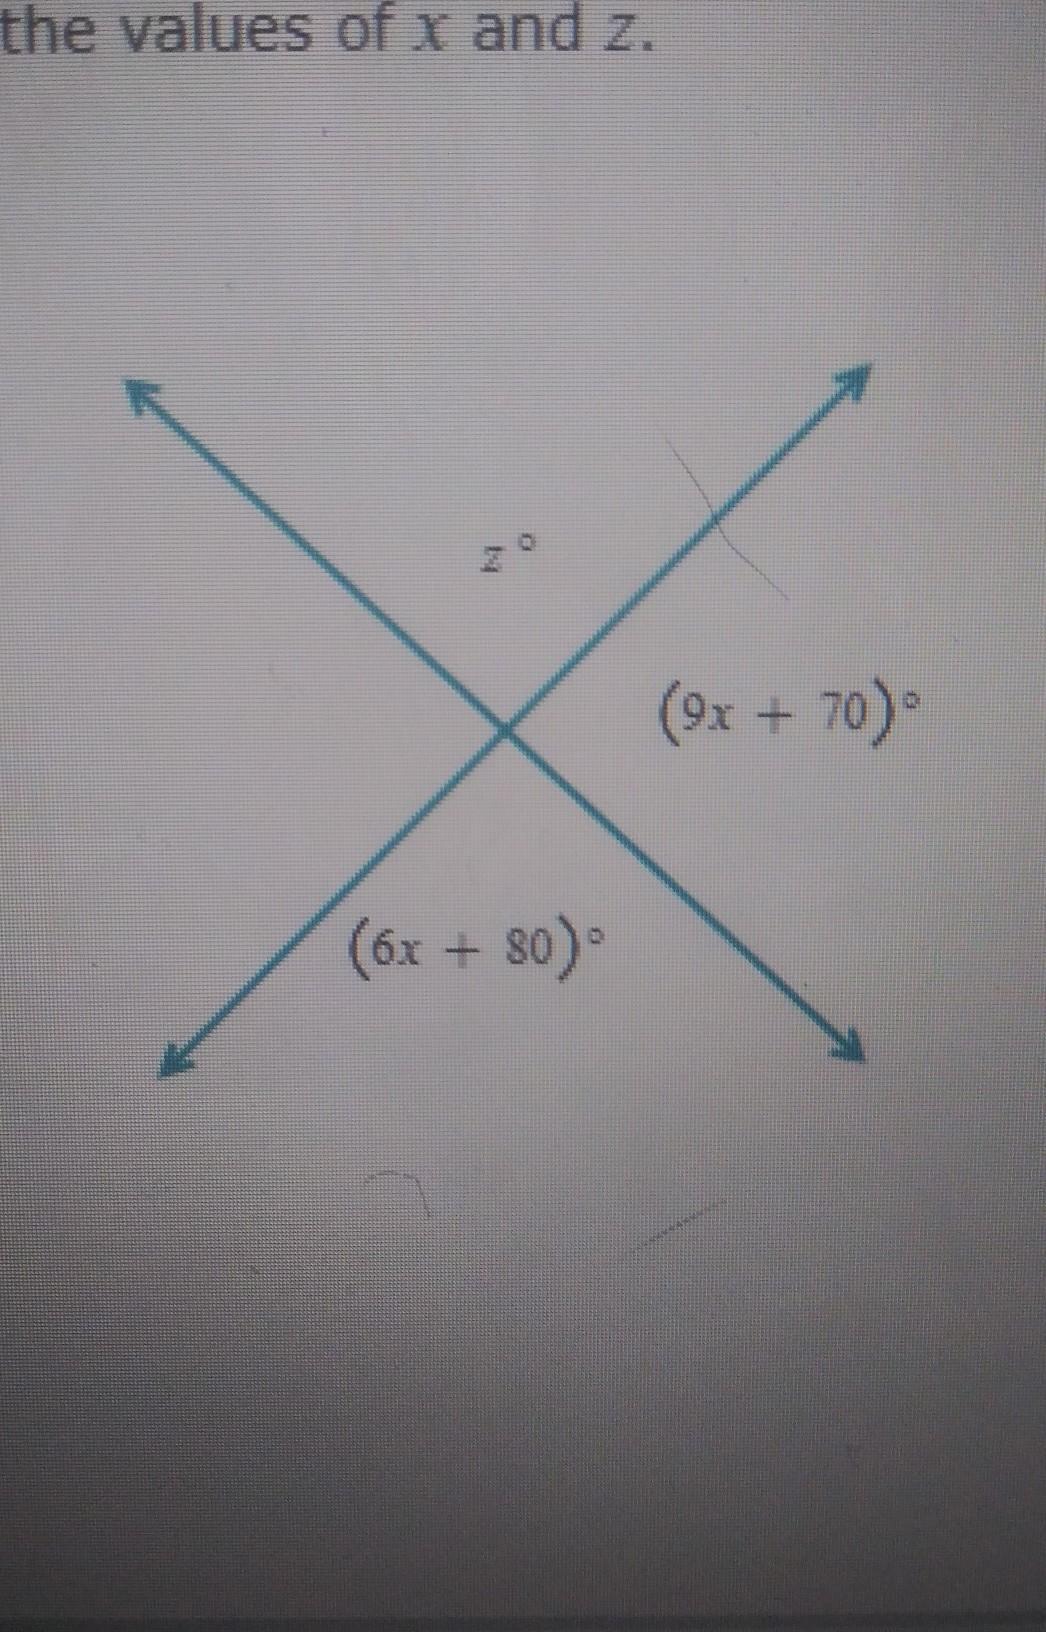 Given The Figure Below, Find The Values Of X And Z. (9x + 70). (6x + 80).